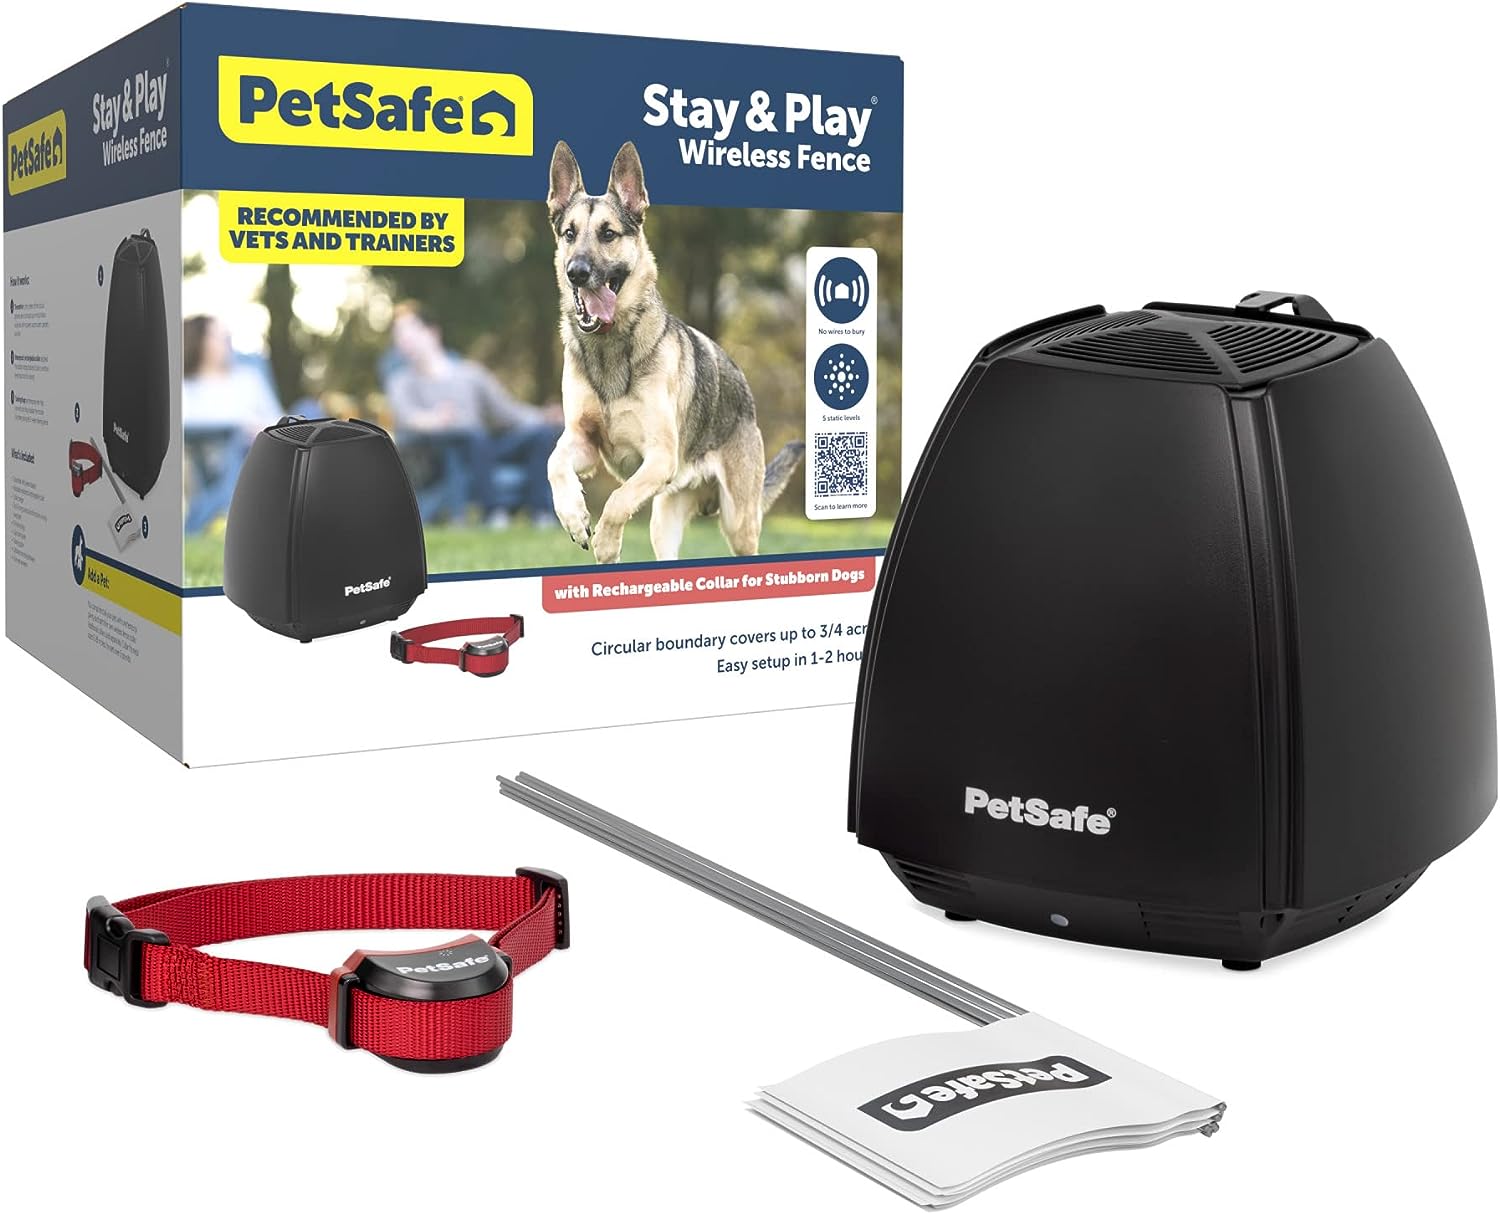 PetSafe Stay  Play Wireless Pet Fence for Stubborn Dogs - No Wire Circular Boundary, Secure 3/4-Acre Yard, For Dogs 5lbs+, Americas Safest Wireless Fence From Parent Company INVISIBLE FENCE Brand